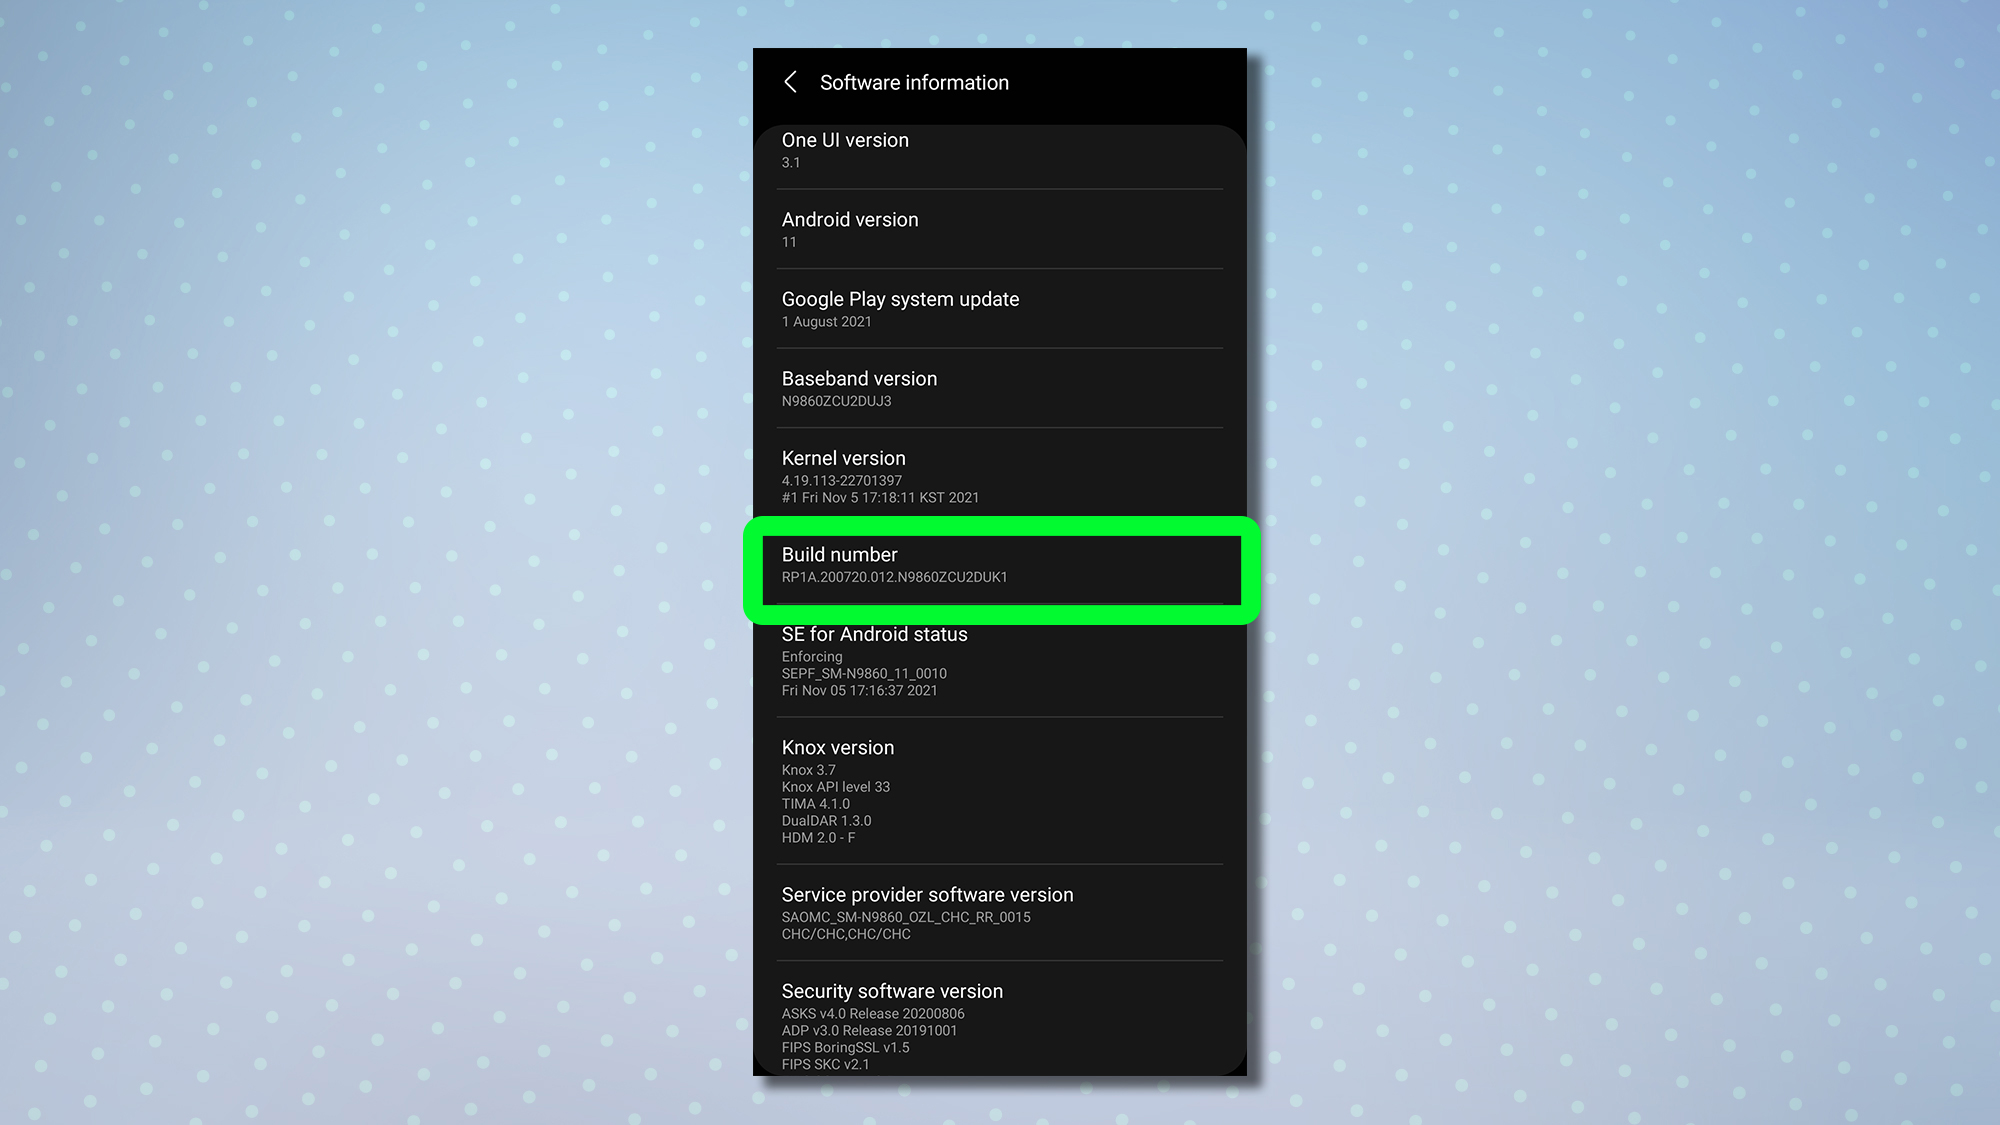 A screenshot showing the Android software information menu